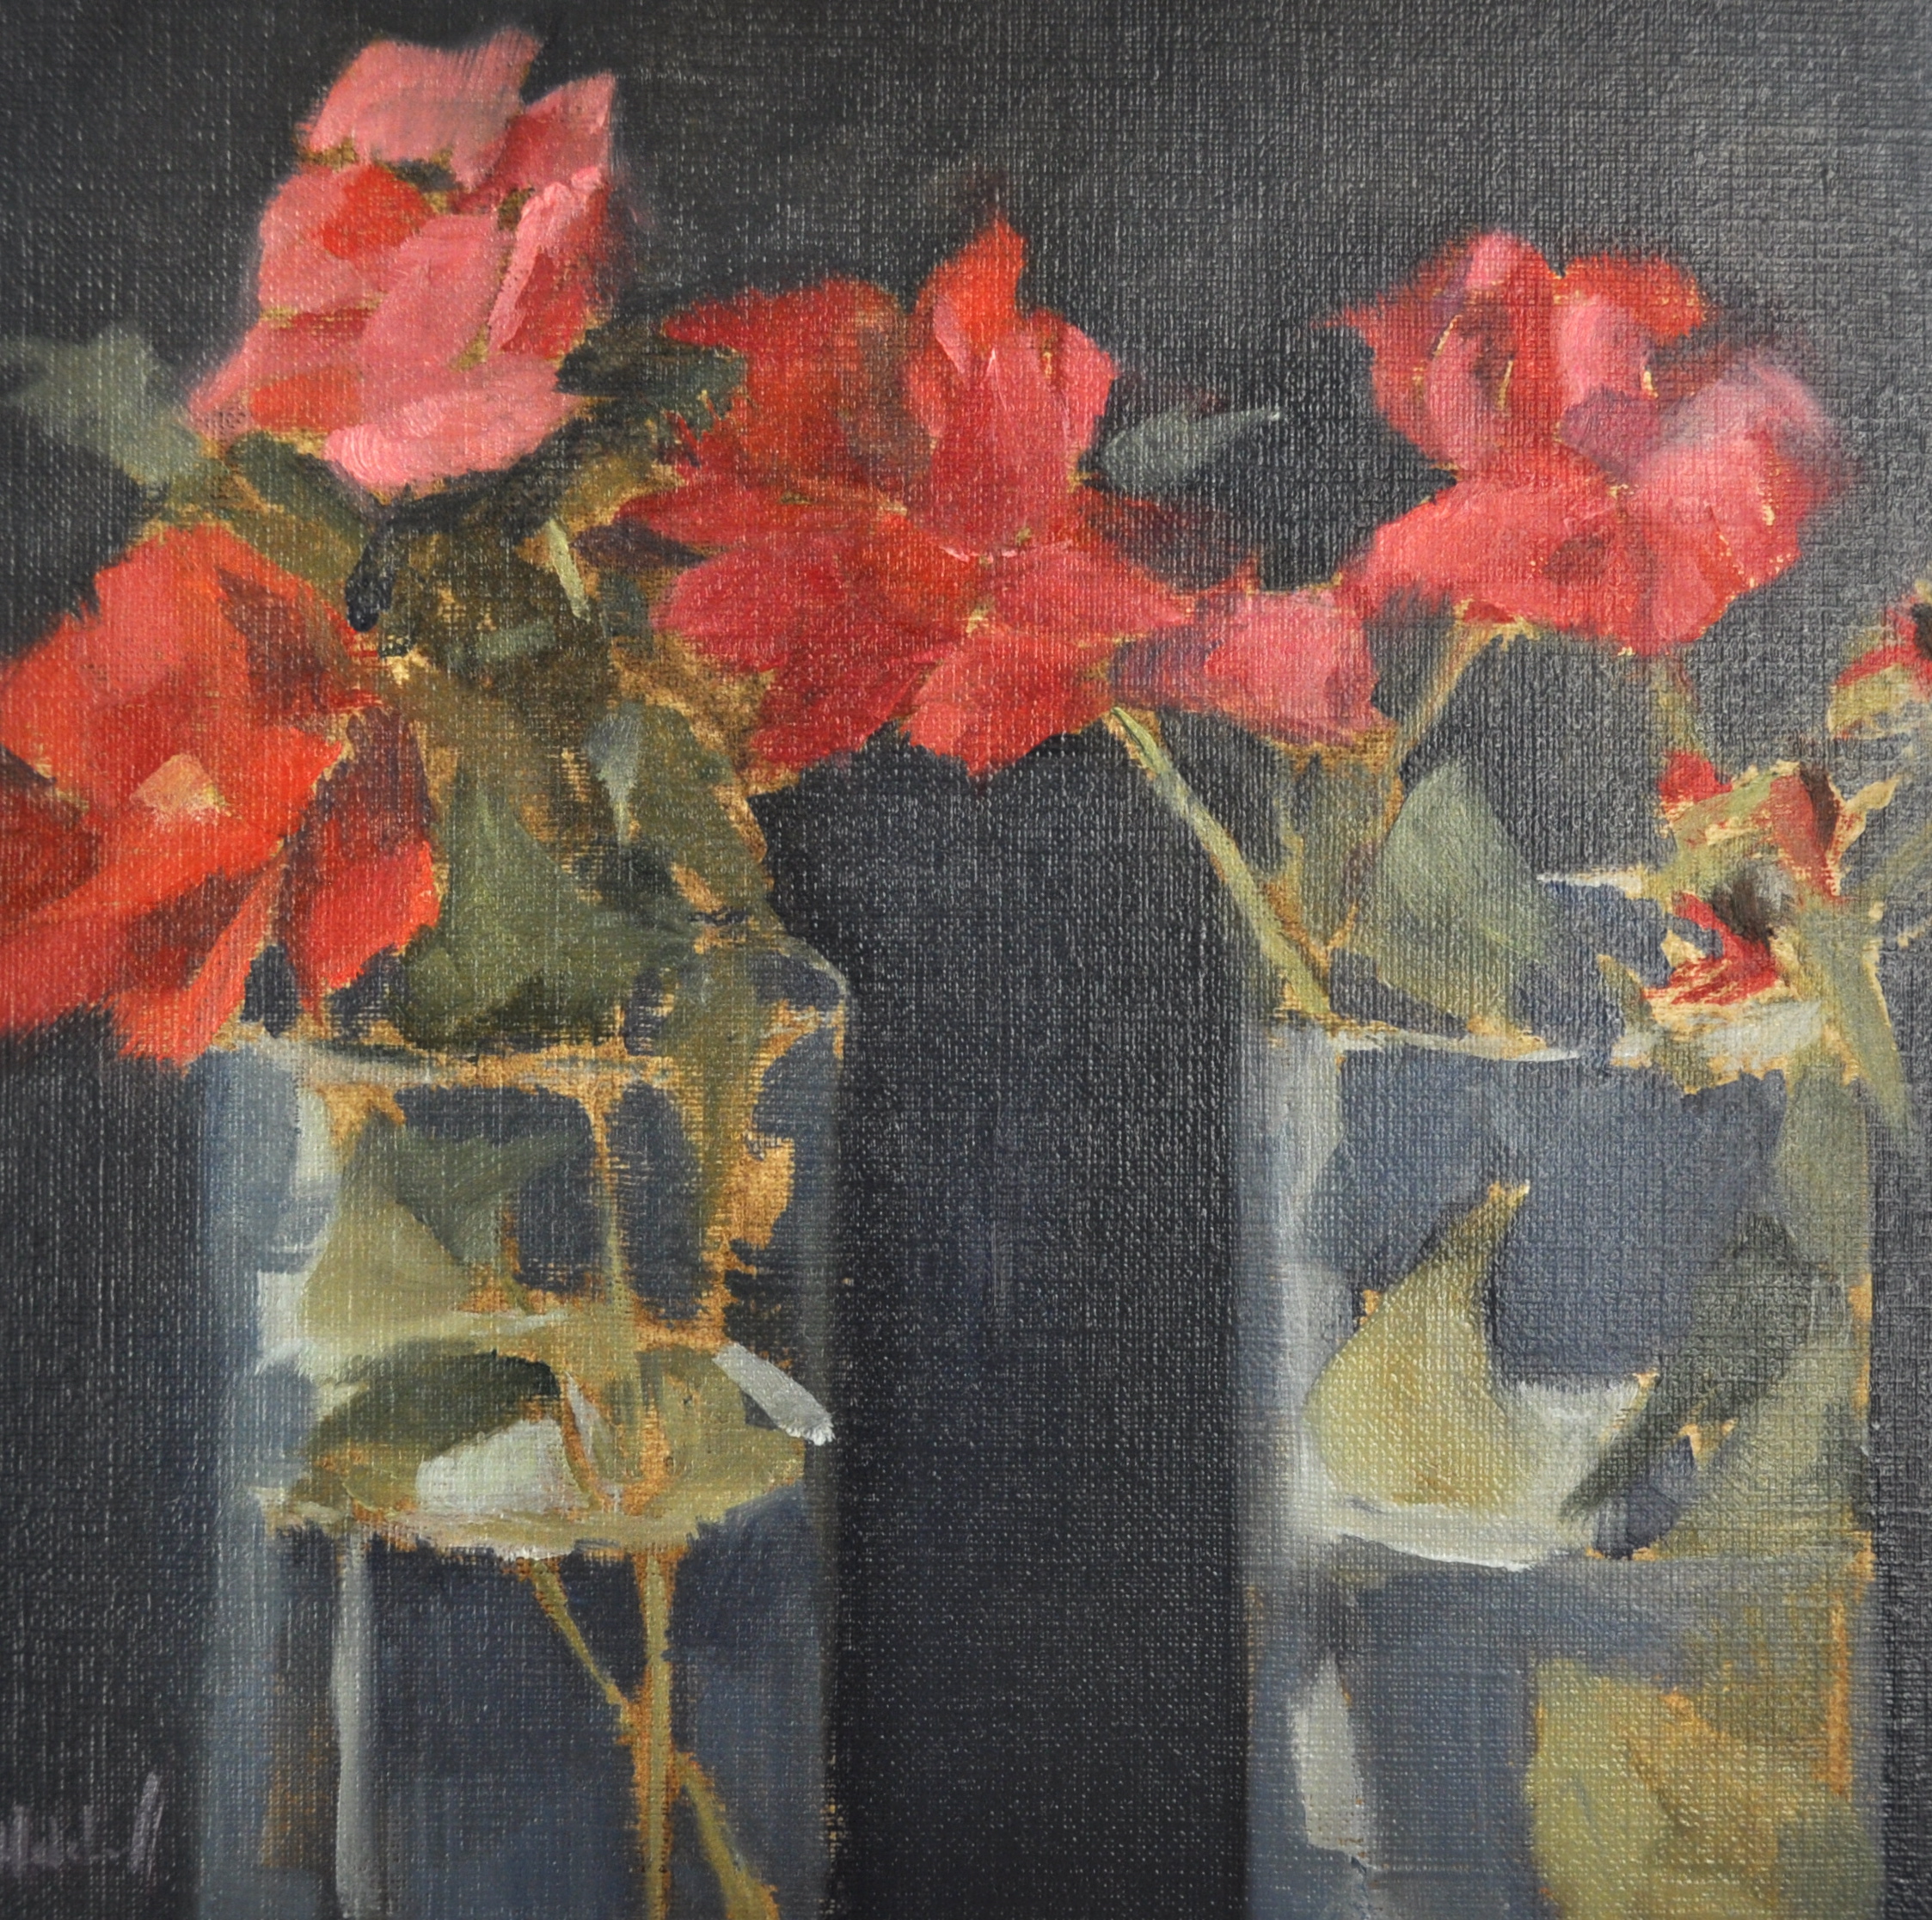 Glass and Rose, Oil on Linen, 8 x 8, sold